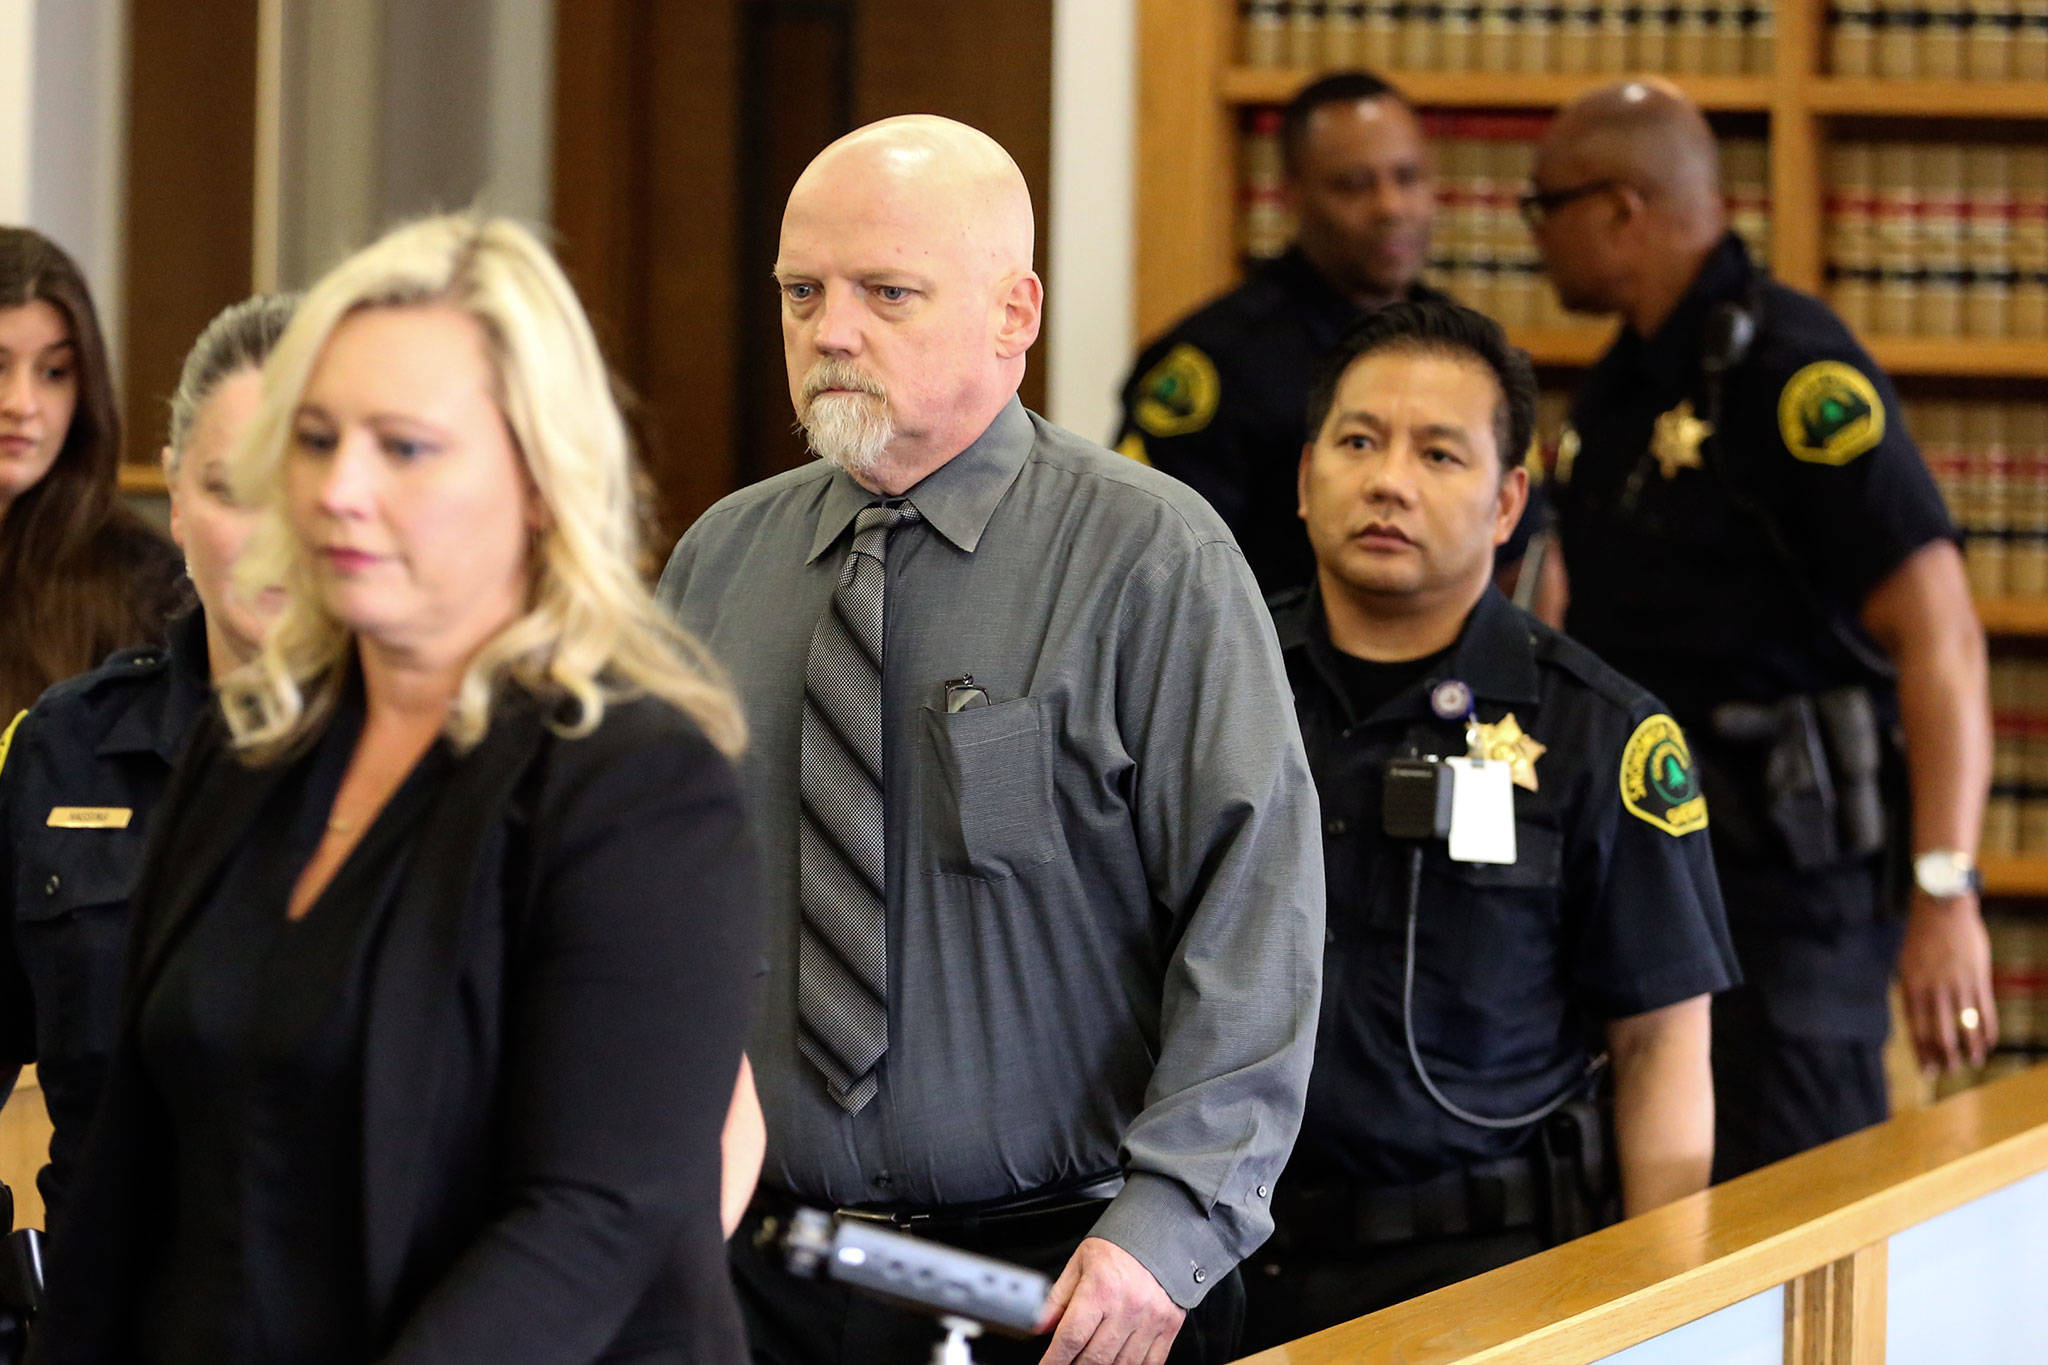 William Talbott II (center) in escorted to his seat Friday morning at the Snohomish County Court House in Everett. Talbott was found guilty of the murder of Jay Cook and Tanya Van Cuylenborg. (Kevin Clark / The Herald)